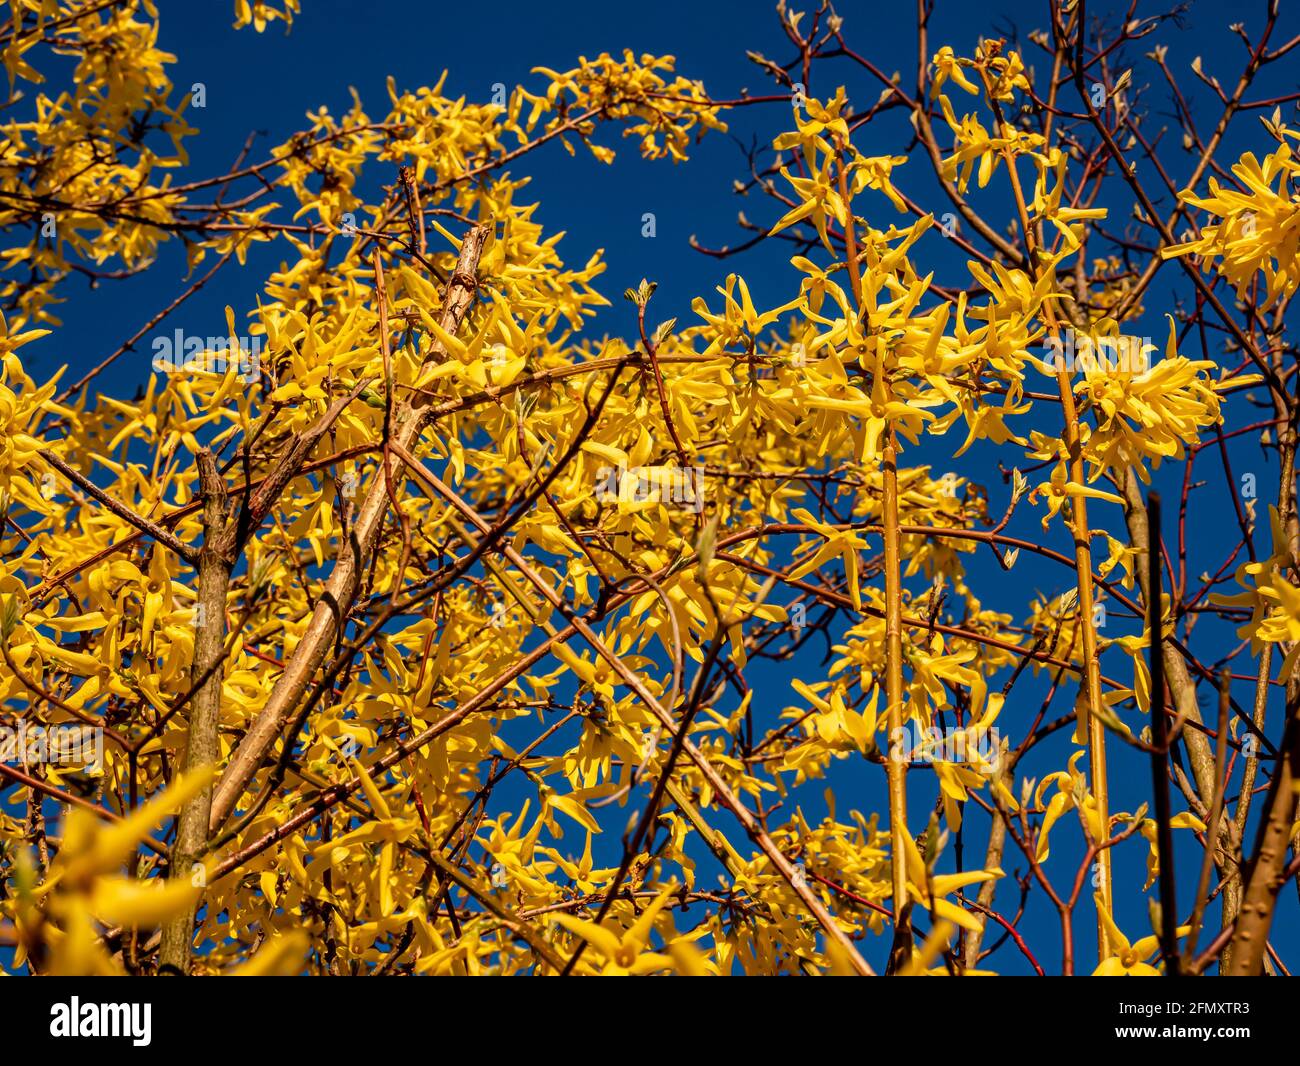 Yellow flowers of Forsythia x intermedia in direct sunlight at the time of the golden hour, against the dark blue sky Stock Photo